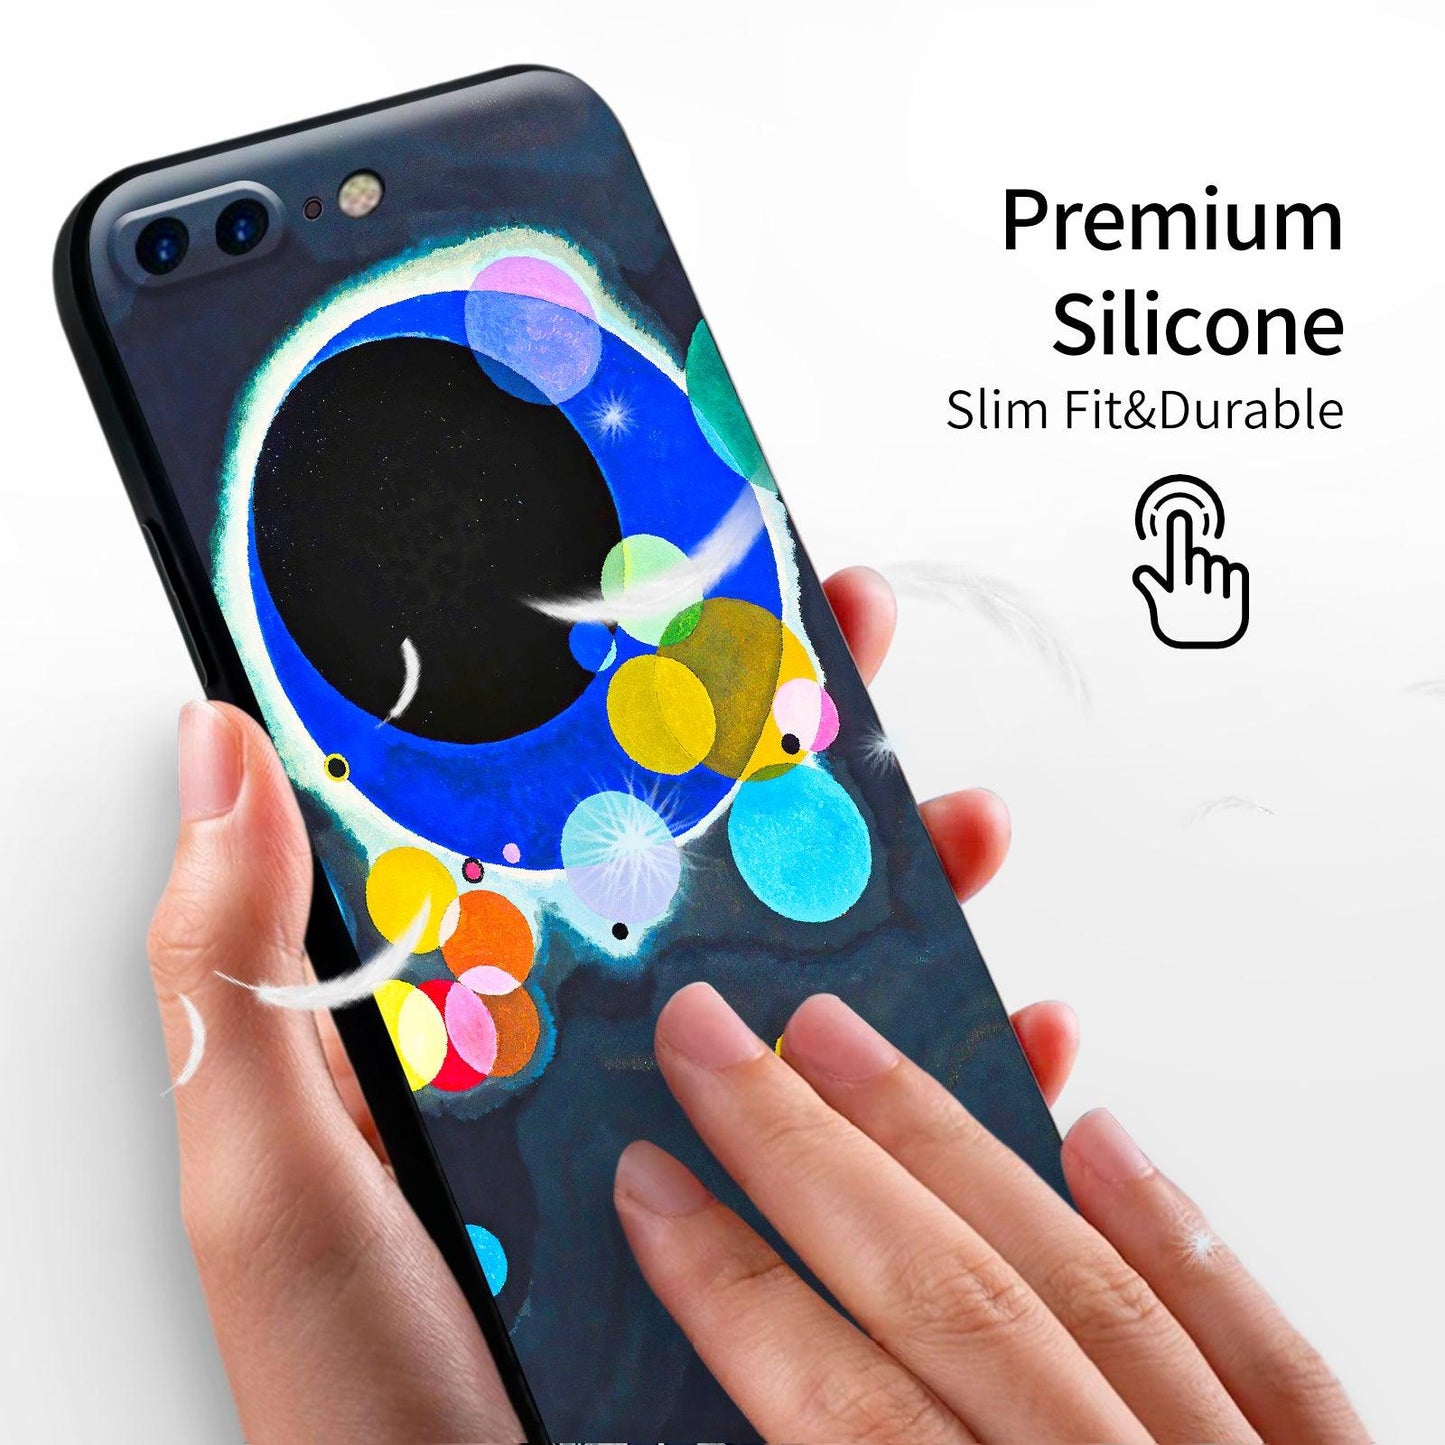 iPhone 7 Plus Case/iPhone 8 Plus Silicone Case(Several Circles by Wassily Kandinsky) - Berkin Arts